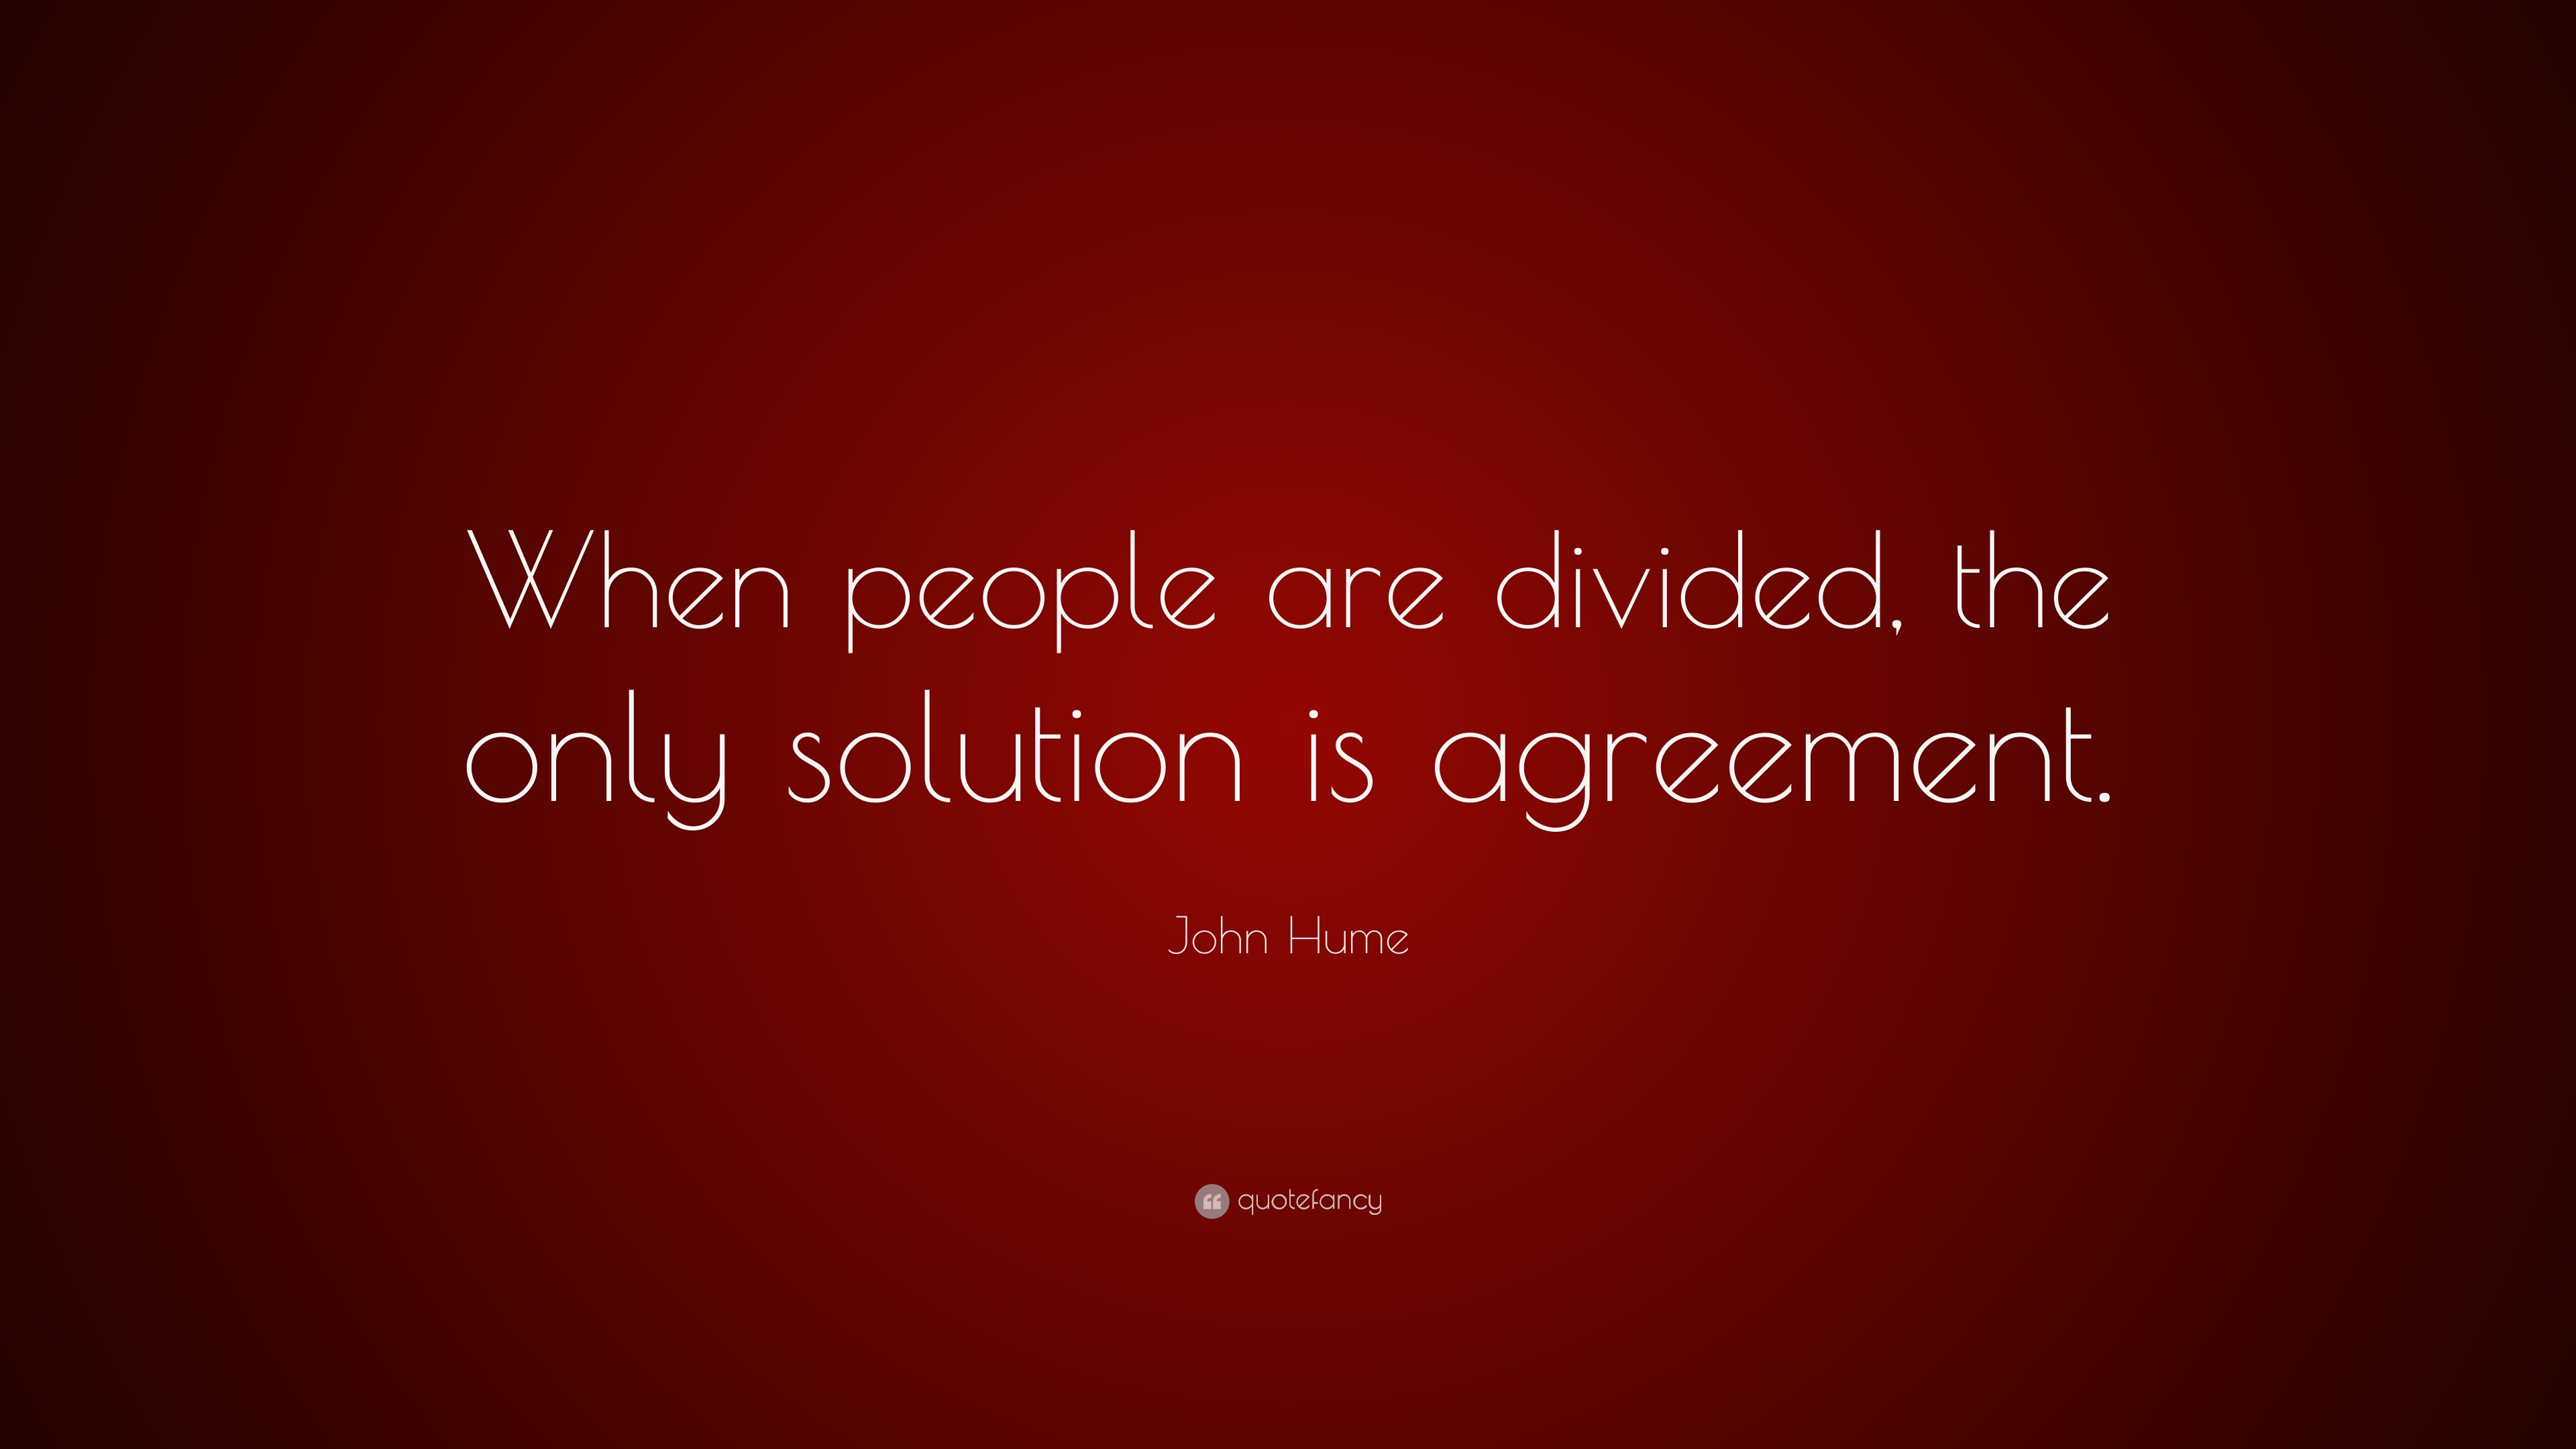 Quotes On Agreement John Hume Quote When People Are Divided The Only Solution Is